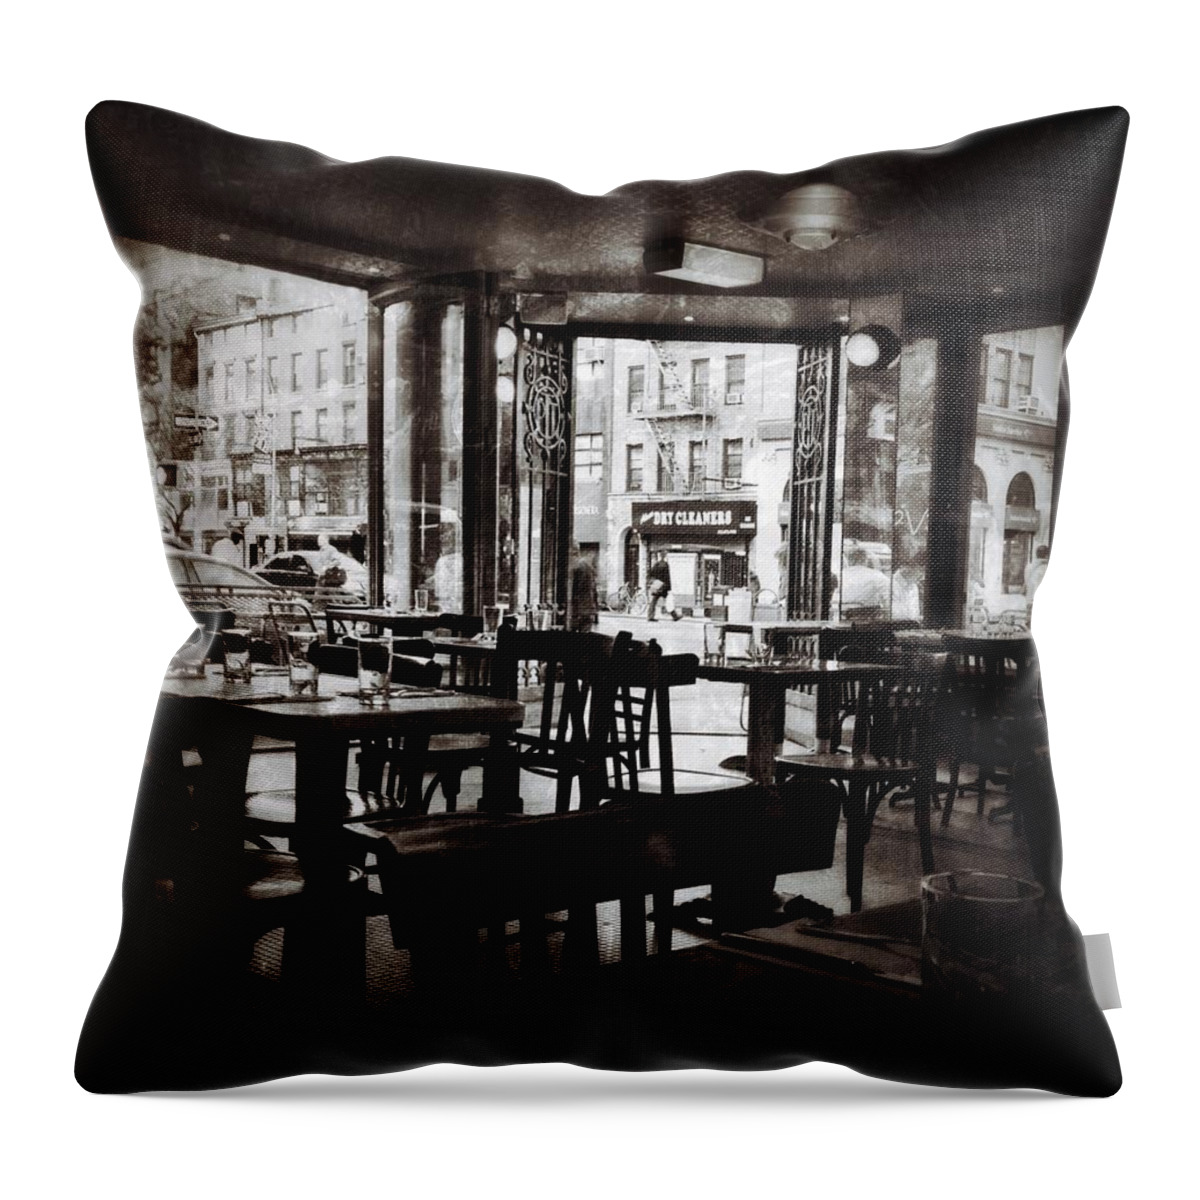 Belcourt Throw Pillow featuring the photograph The Belcourt by Natasha Marco